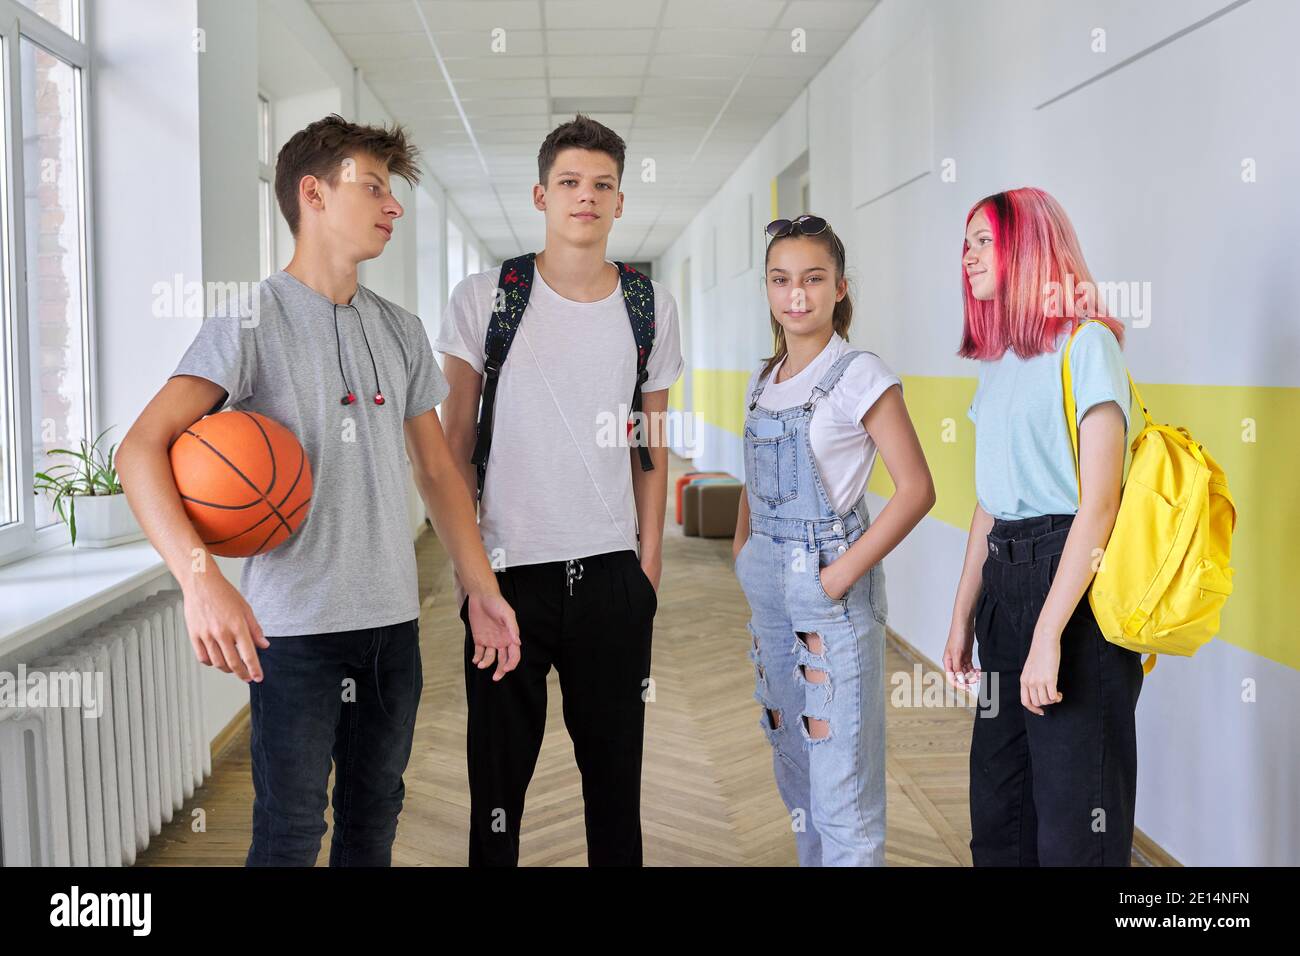 A group of teenage students 16 years old in the school hallway Stock Photo